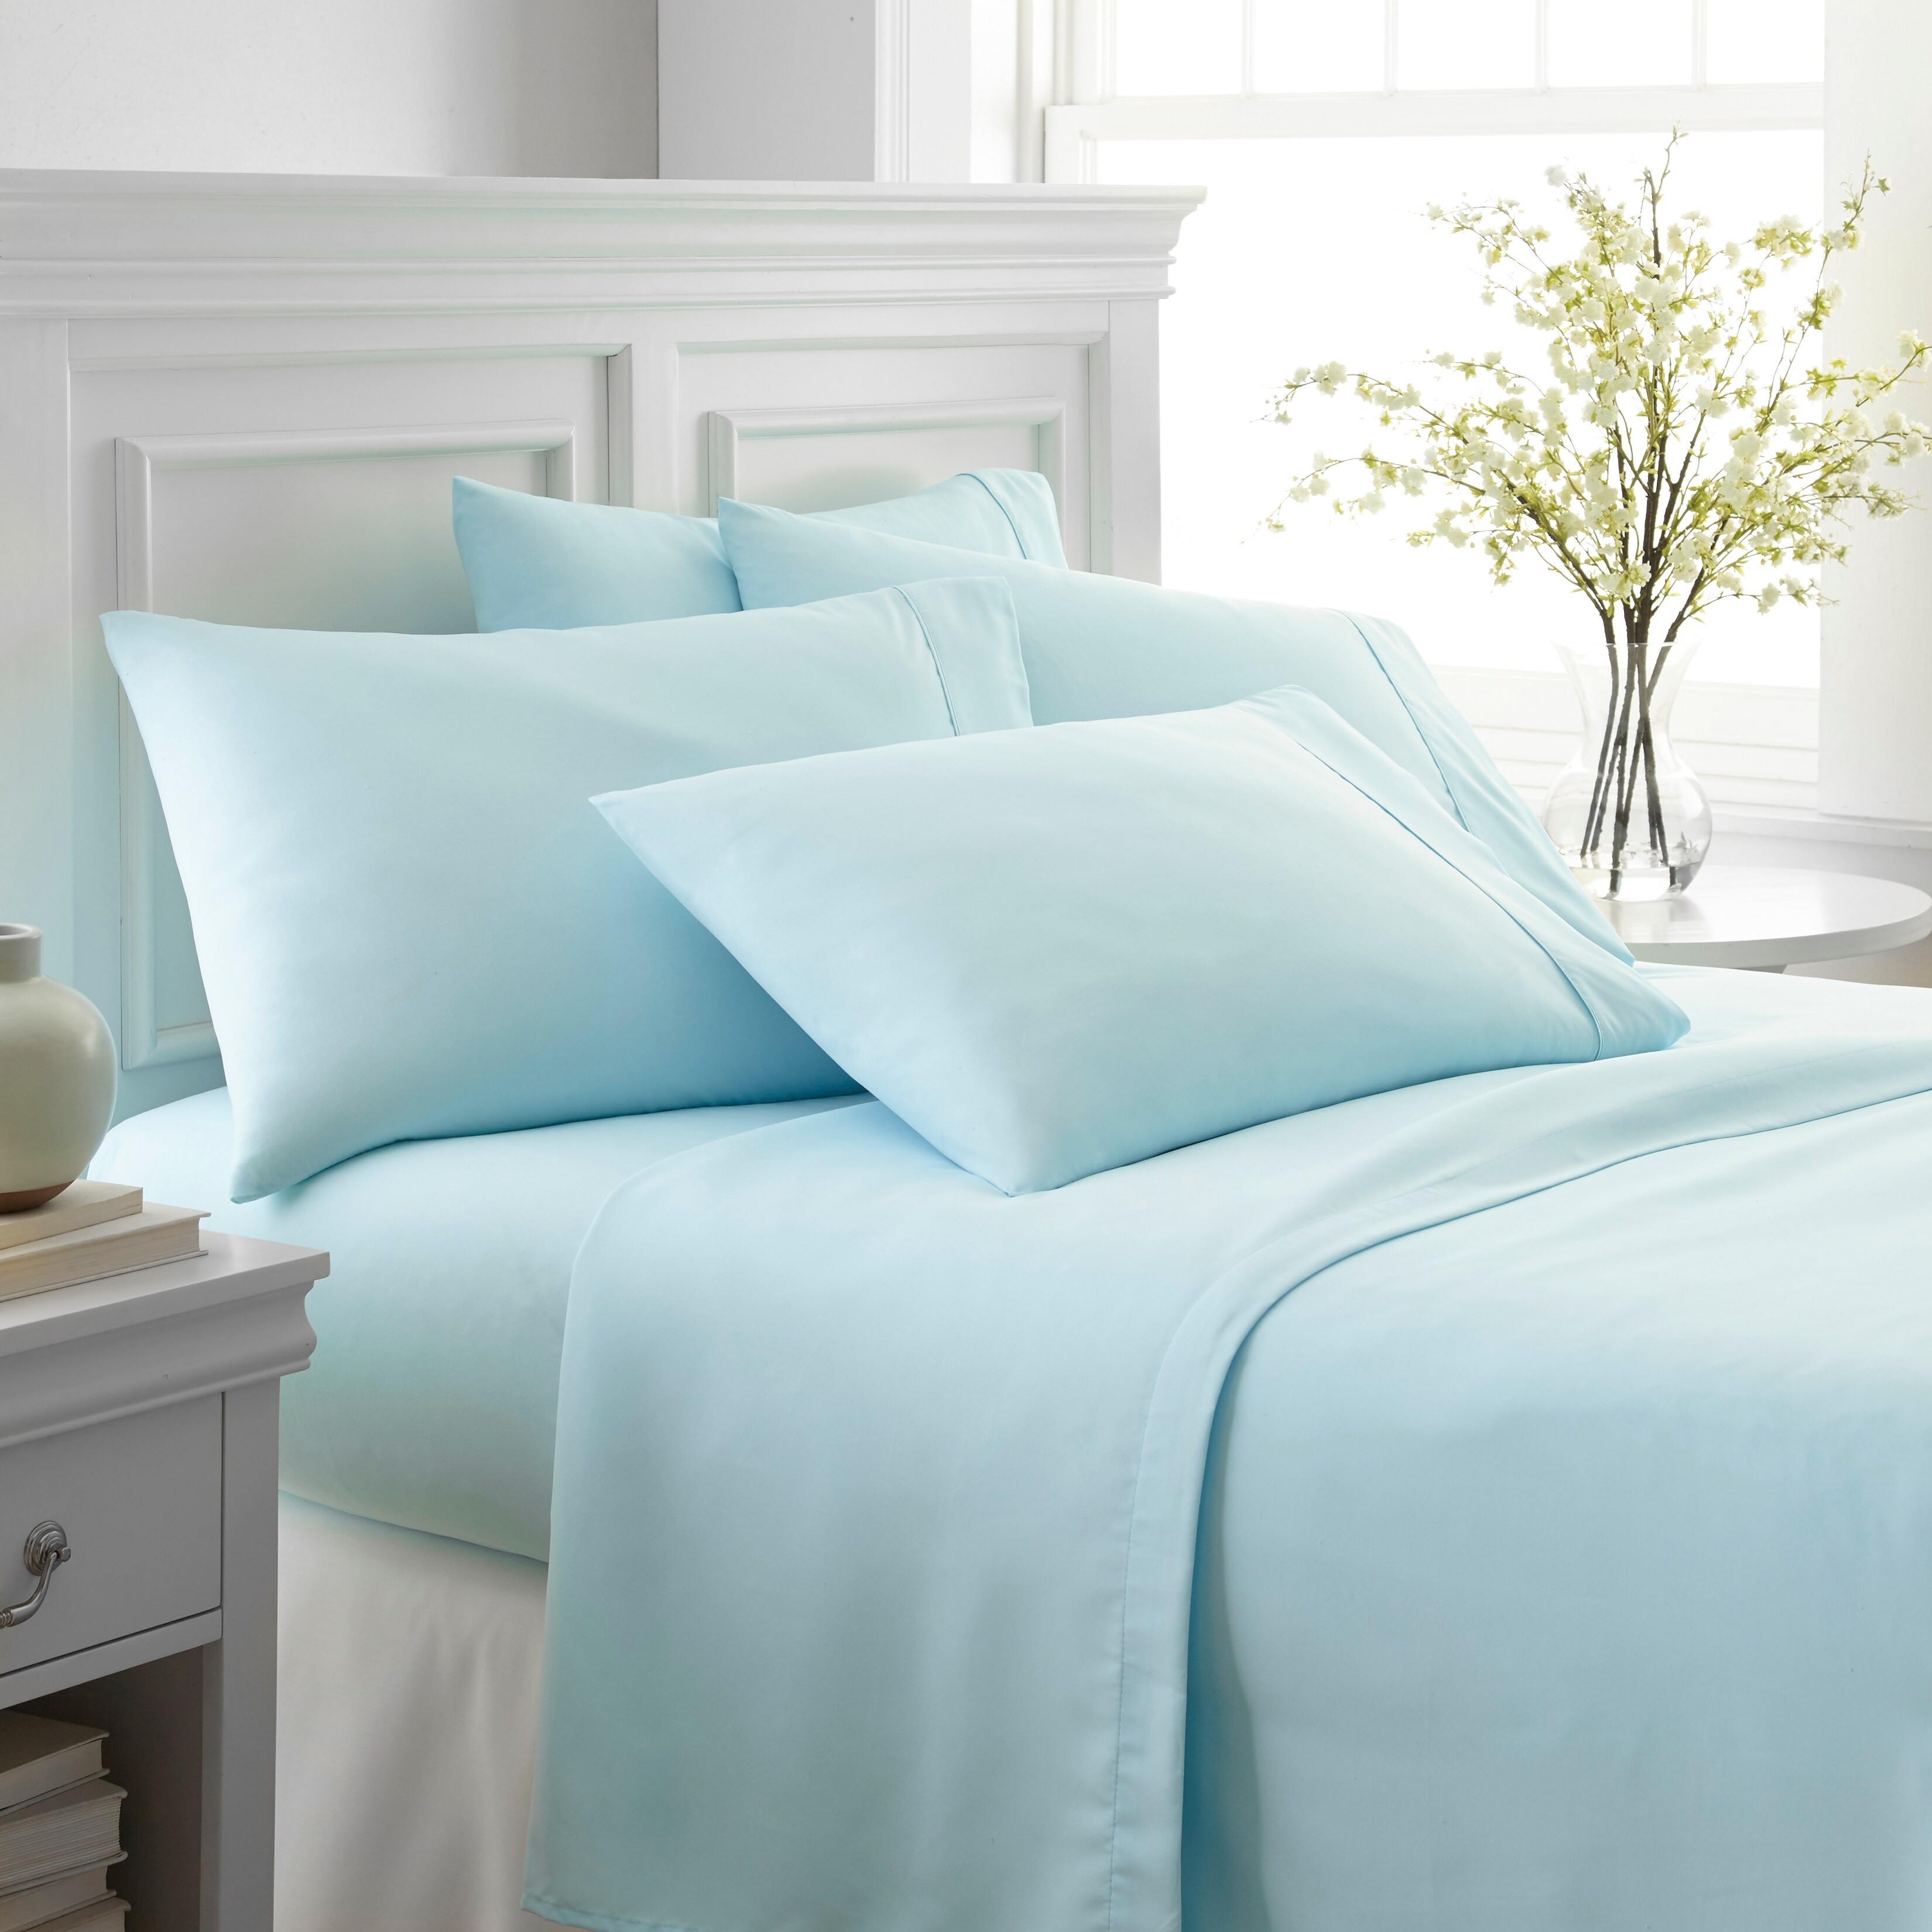 Simply Soft Premium Luxury 6 Piece Bed Sheet Set - image 4 of 5